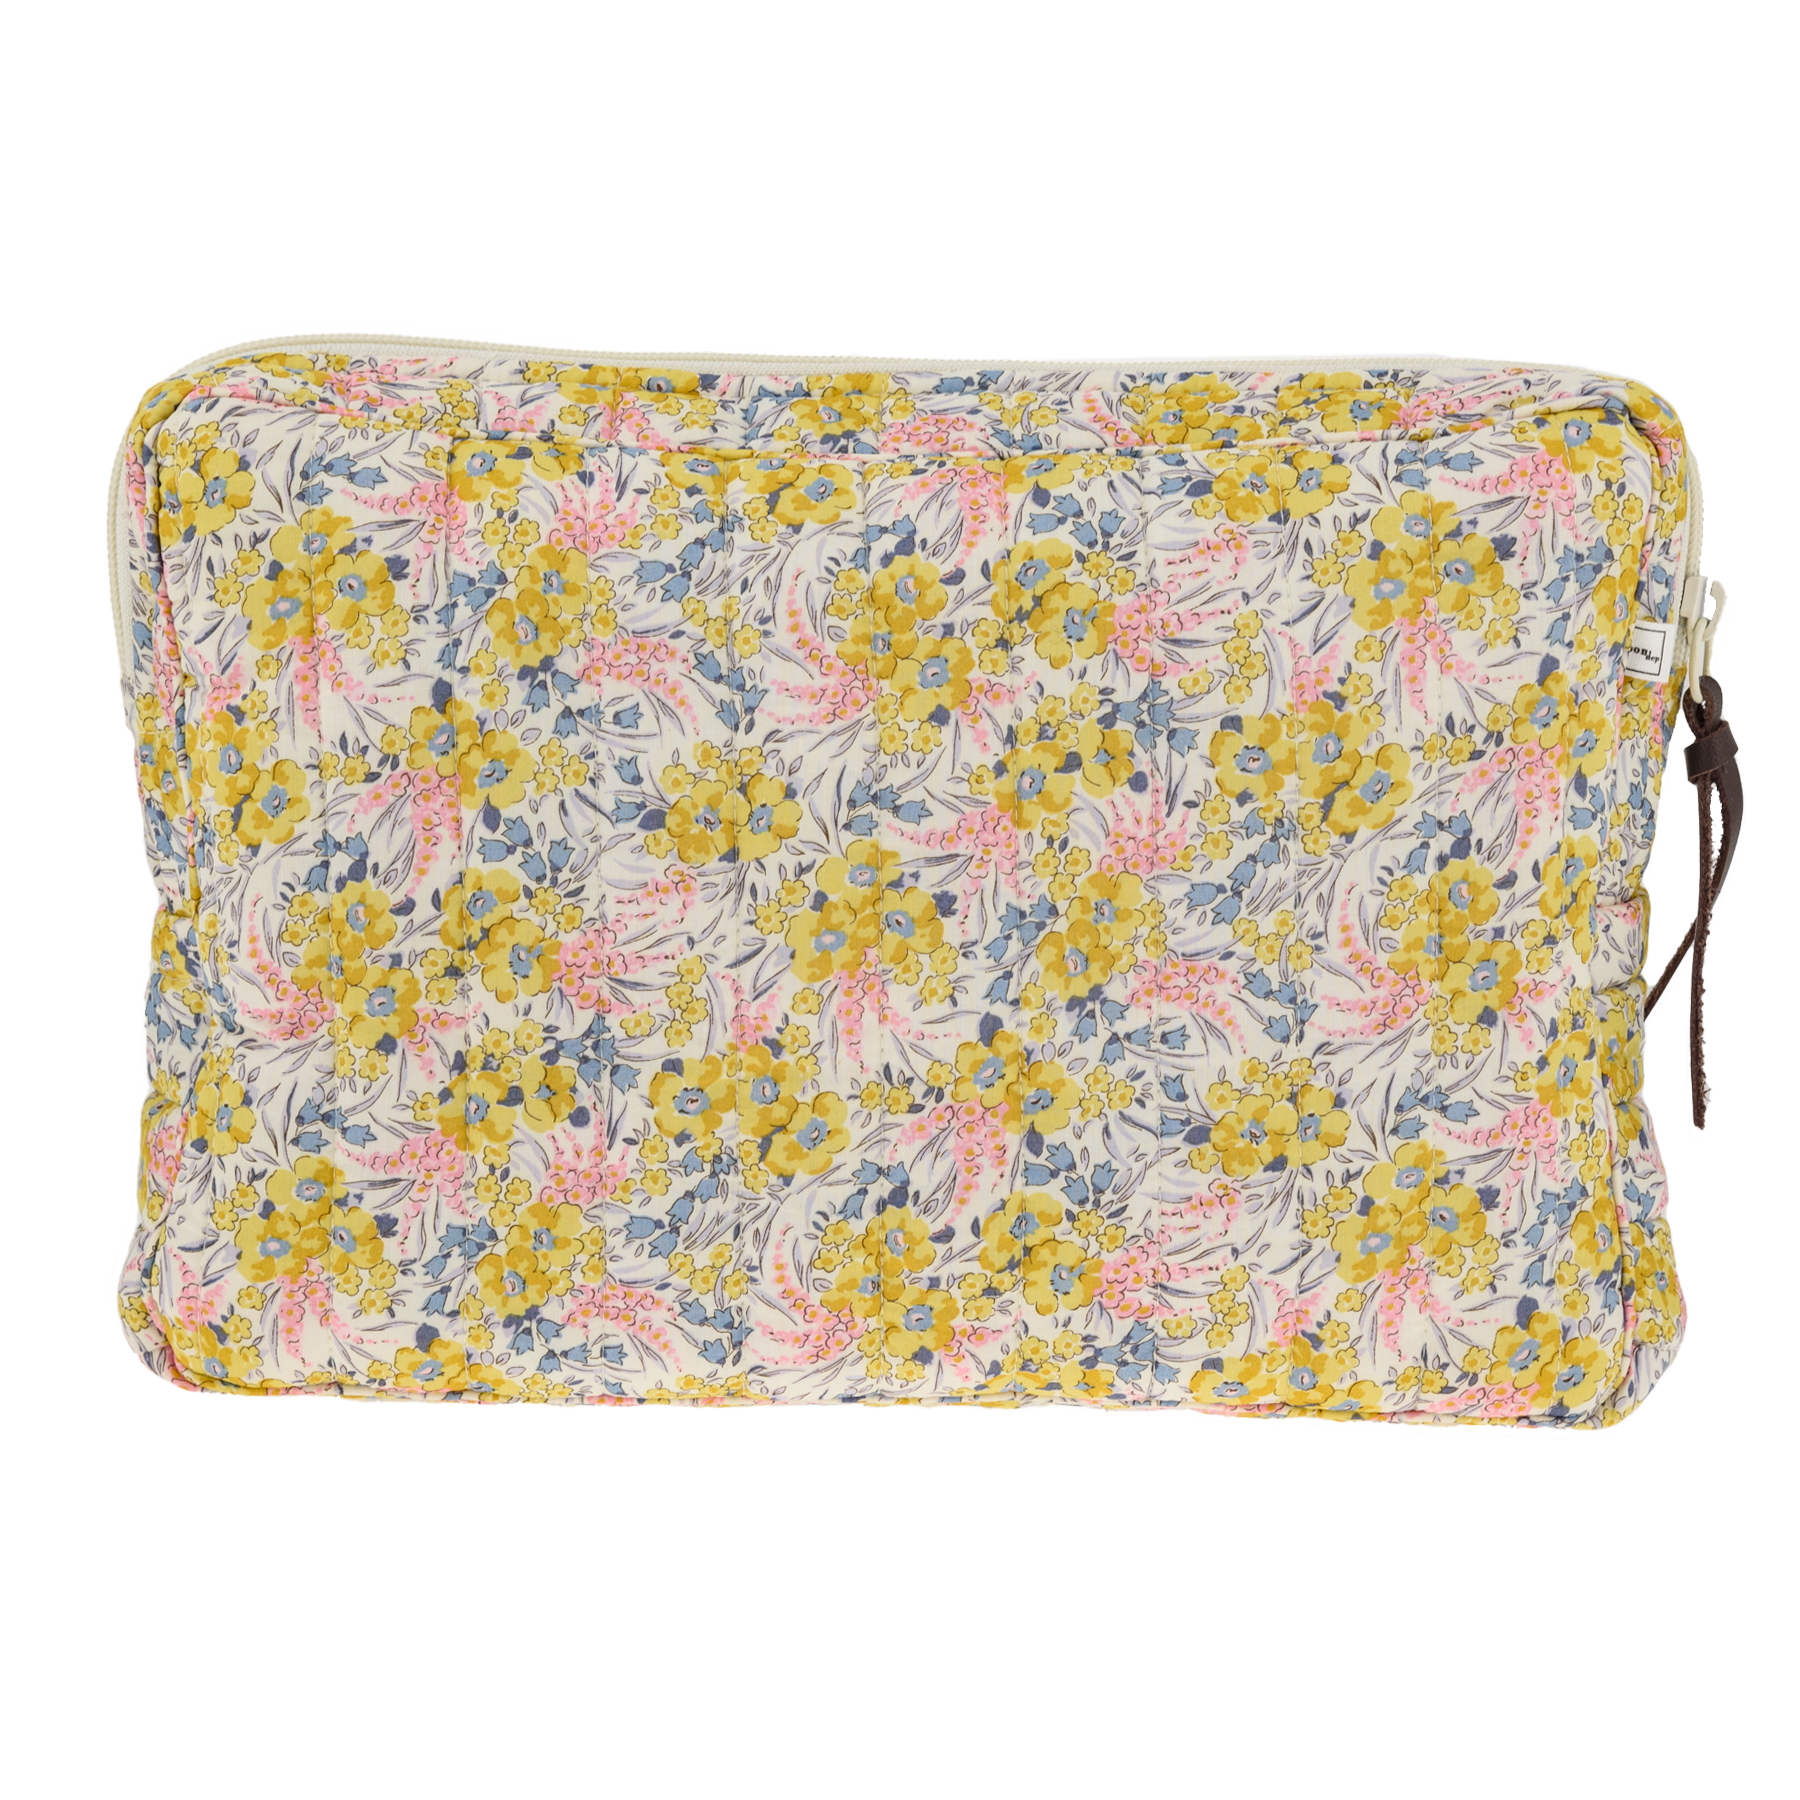 POUCH BIG MW LIBERTY SWIRLING PETALS